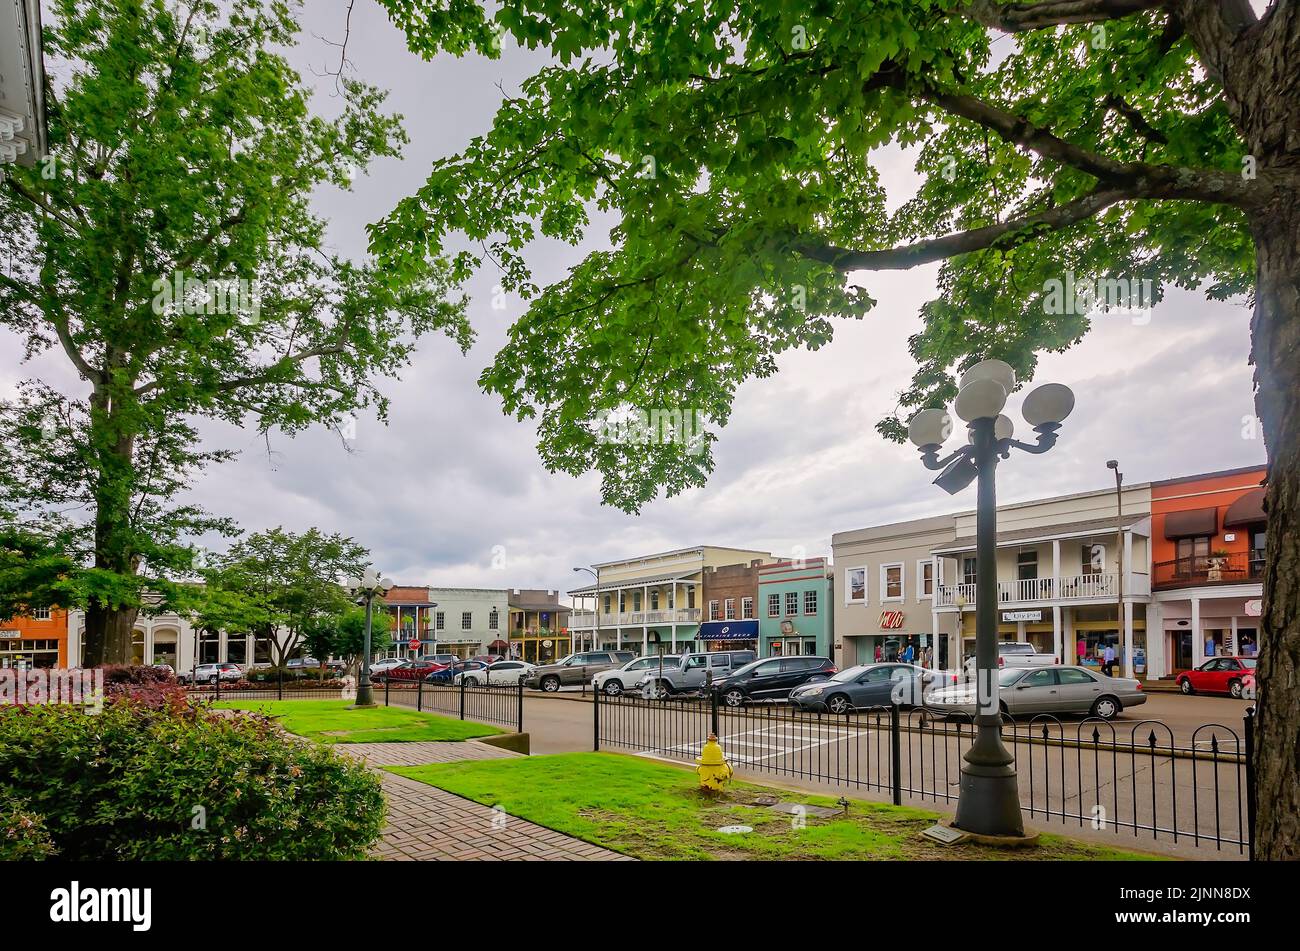 Shops are pictured in Courthouse Square, May 31, 2015, in Oxford, Mississippi. Stock Photo